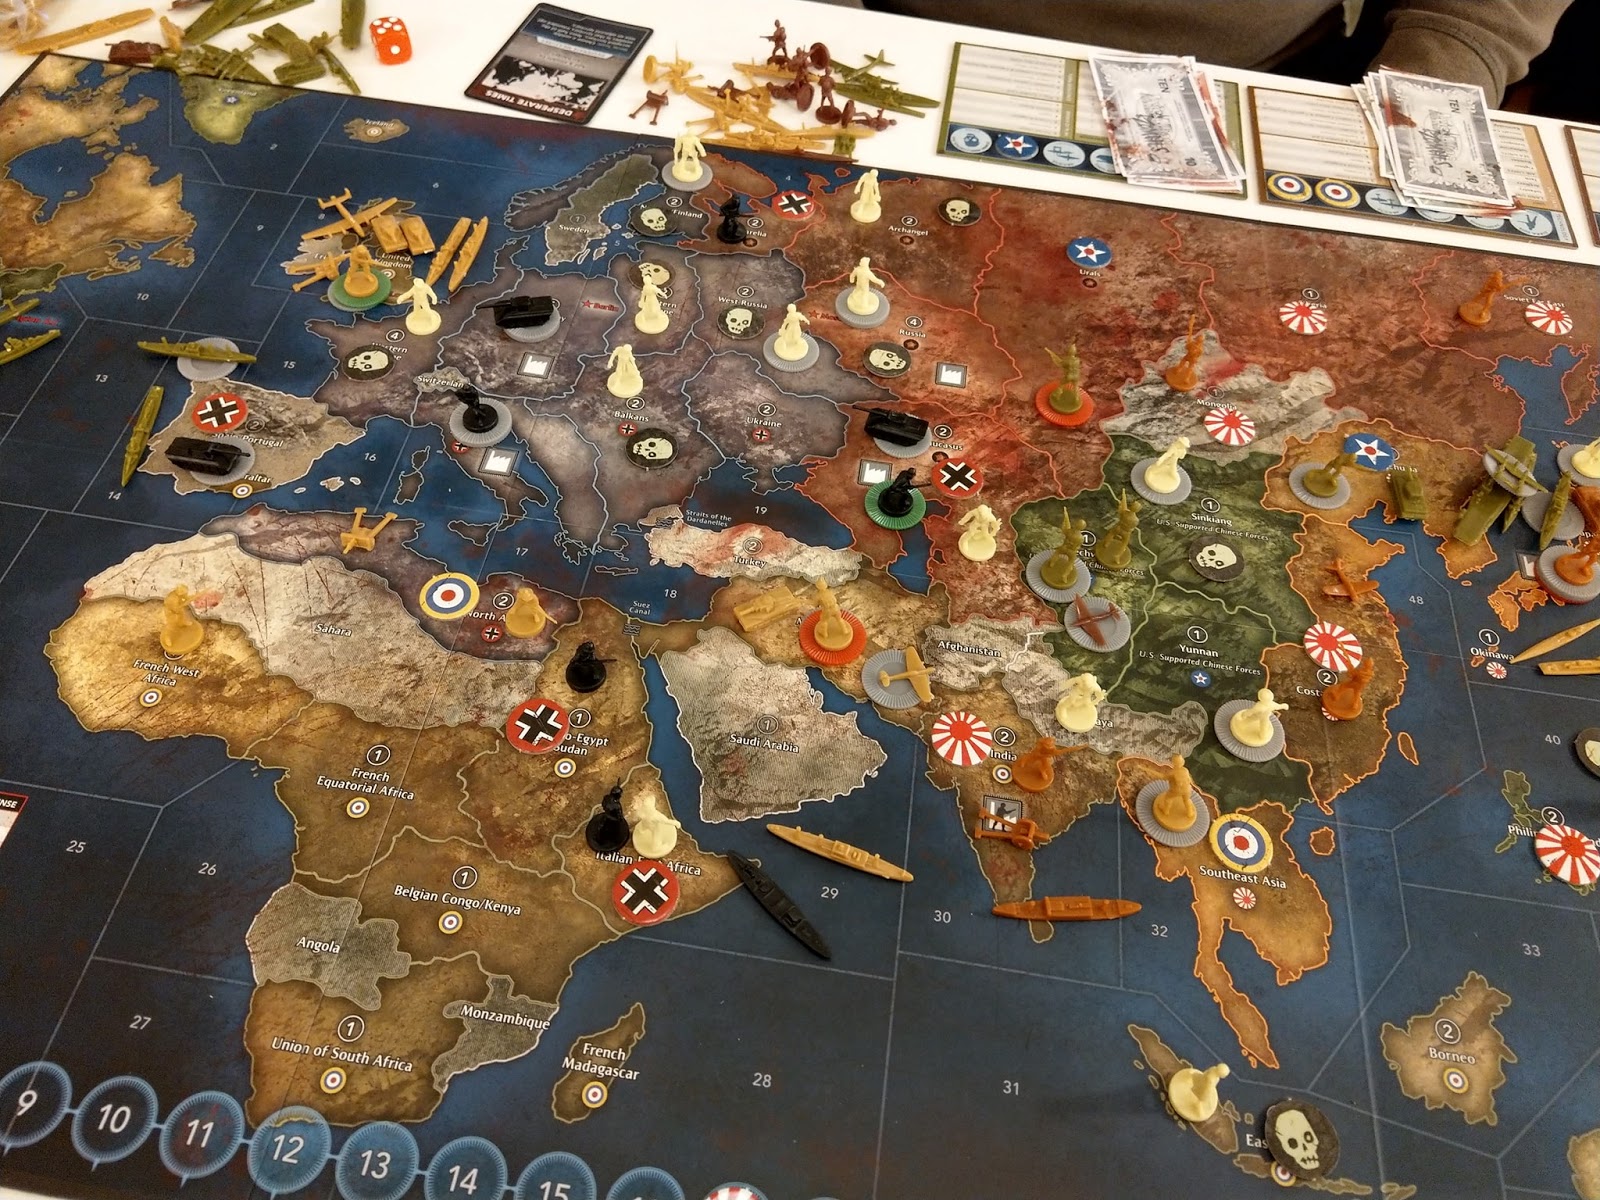 axis & allies & zombies